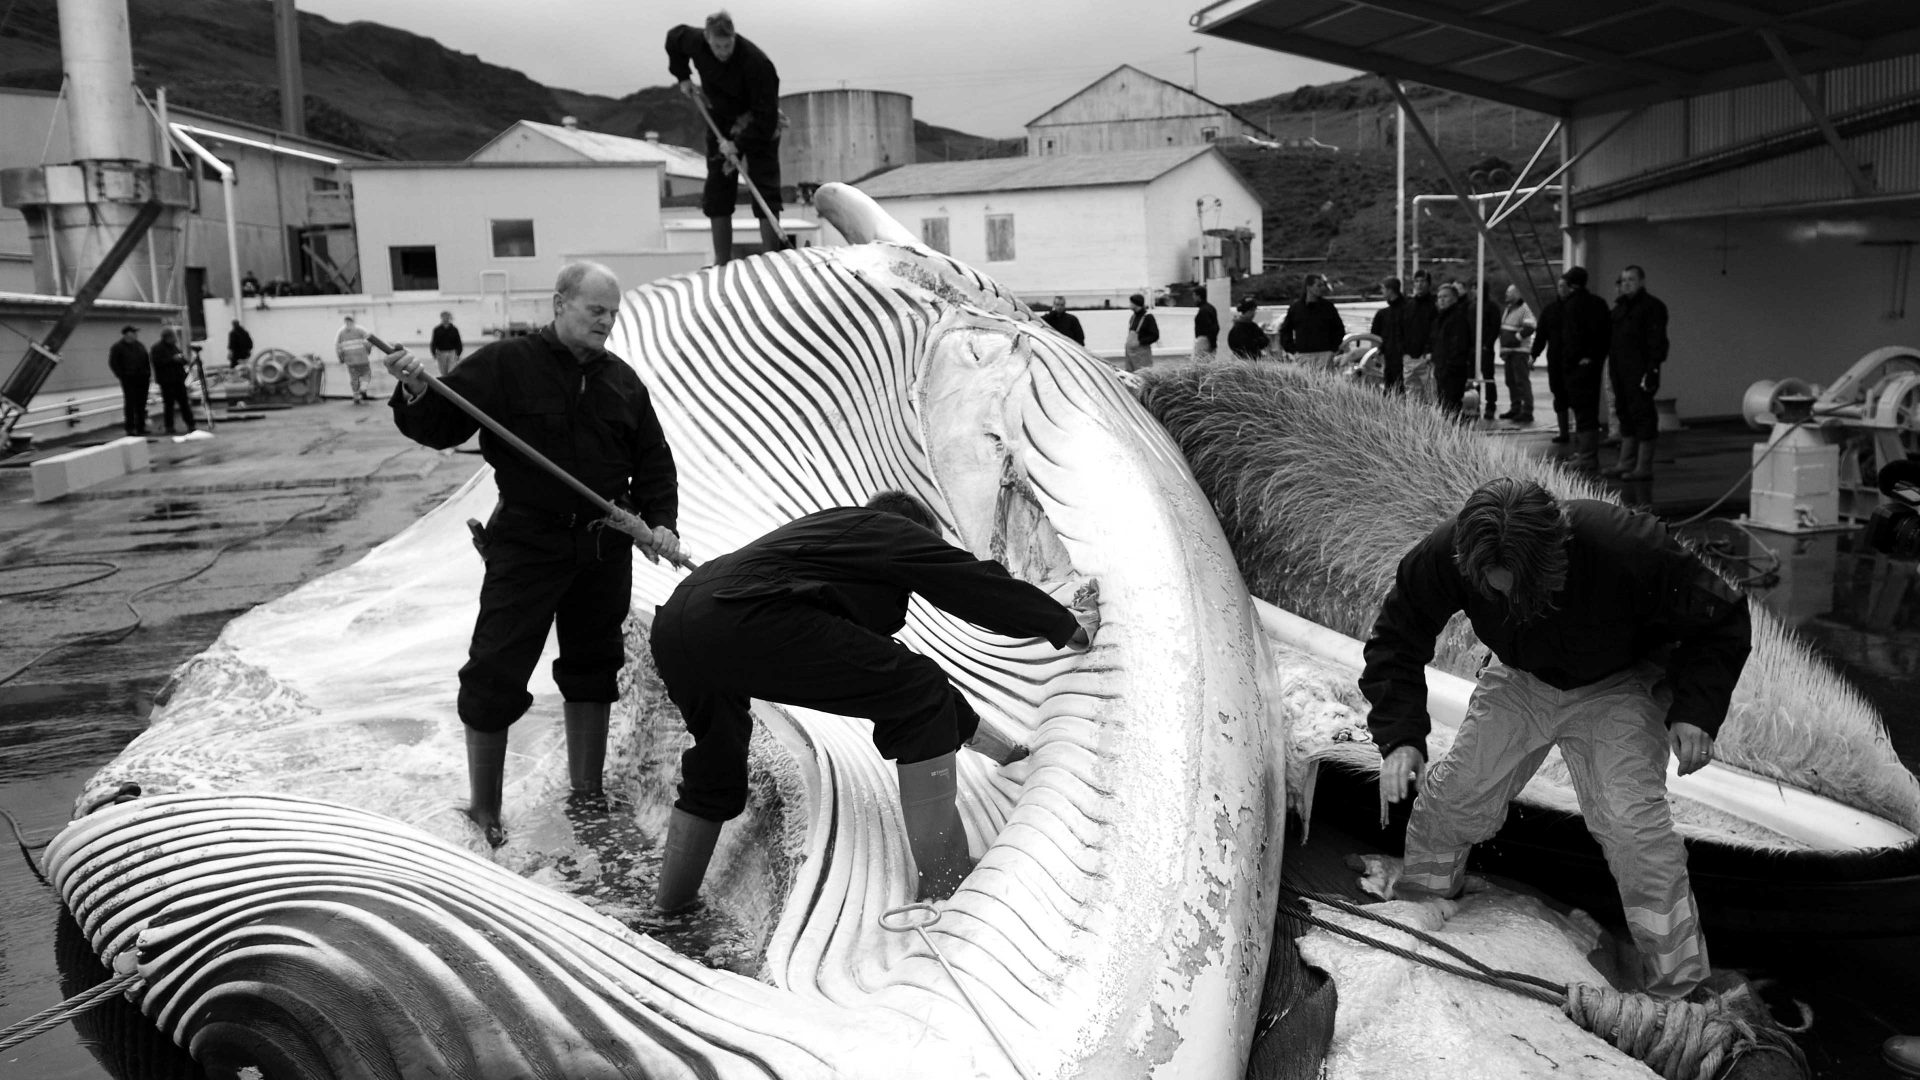 Icelandic whalers cut open a 35-tonne fin whale, one of two fin whales caught aboard a Hvalur boat off the coast of Hvalfjsrour, north of Reykjavik, on the western coast of Iceland. Photo: HALLDOR KOLBEINS/AFP via Getty Images